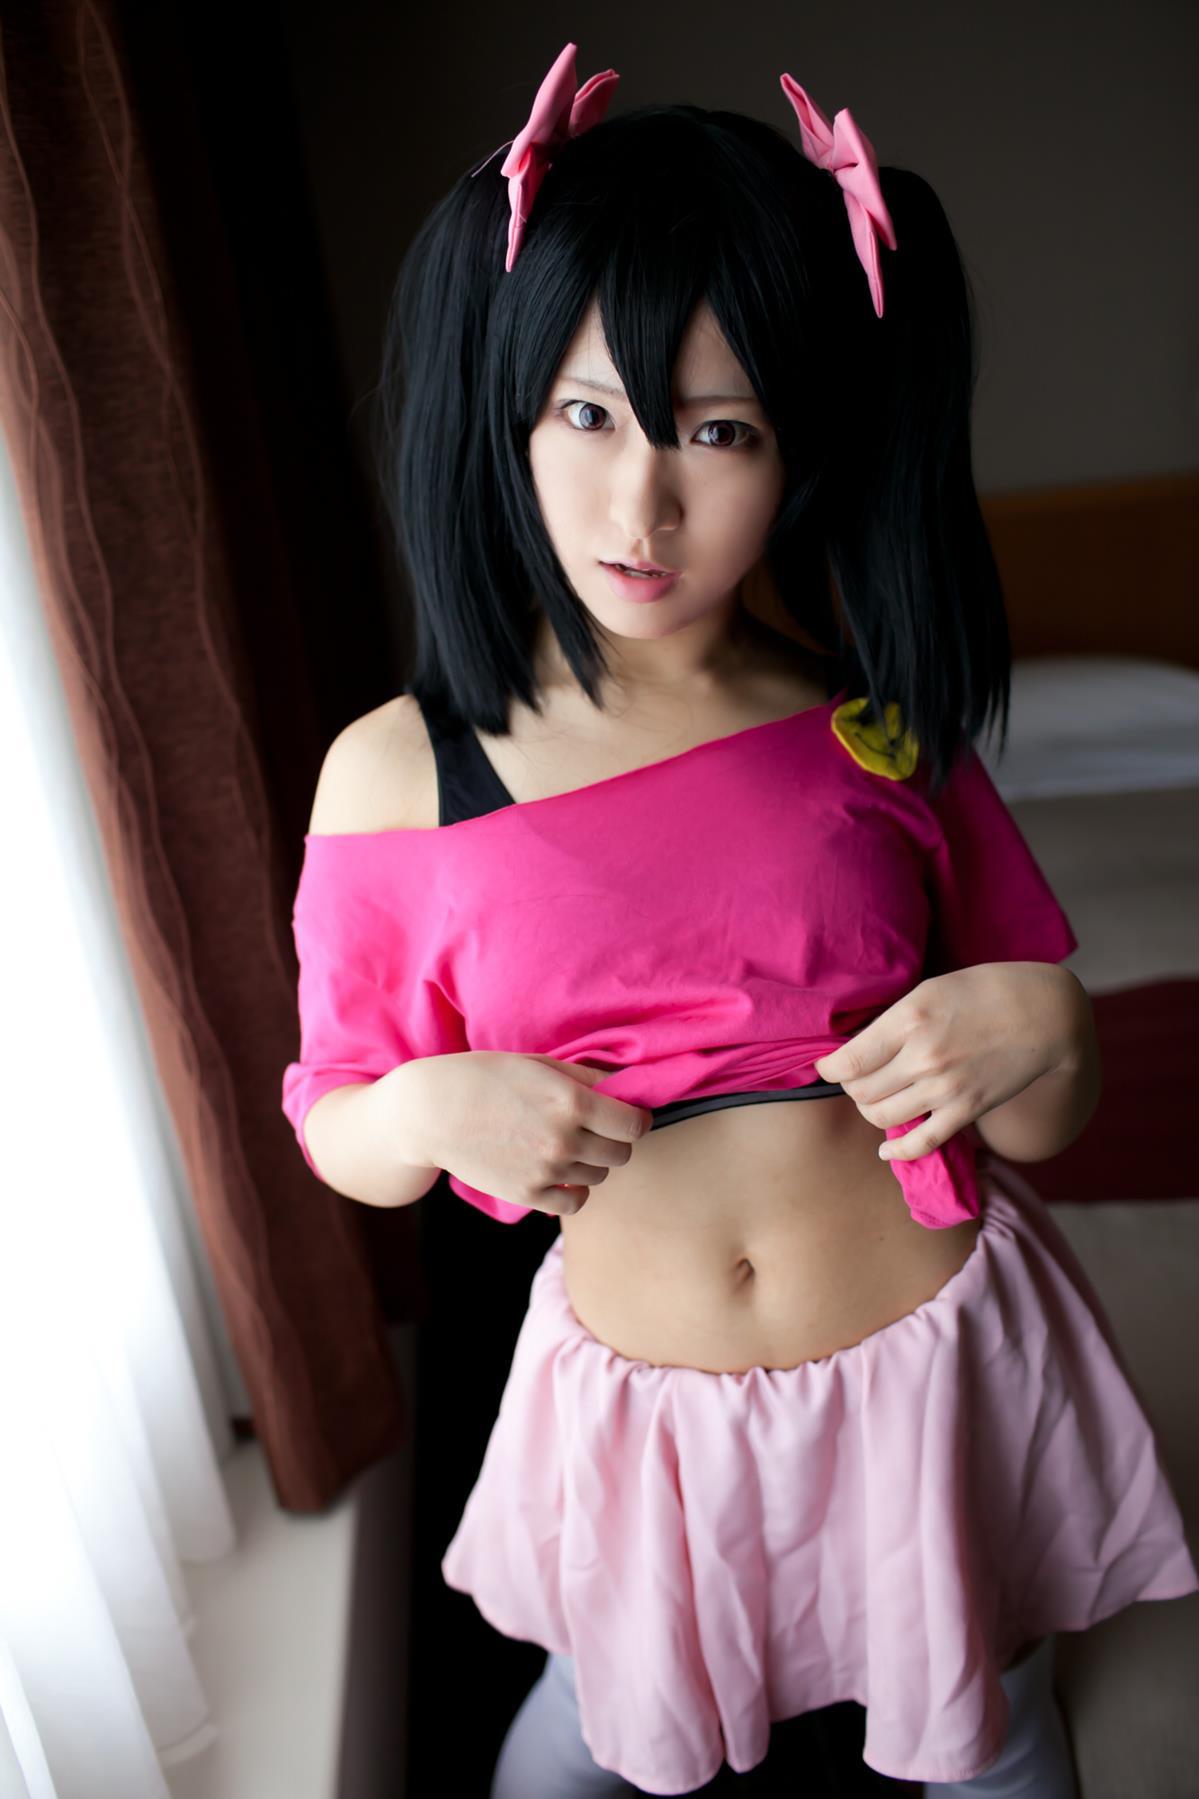 Cute Japanese Cosplay Sex - Asian cosplay girls nude - Excelent porn